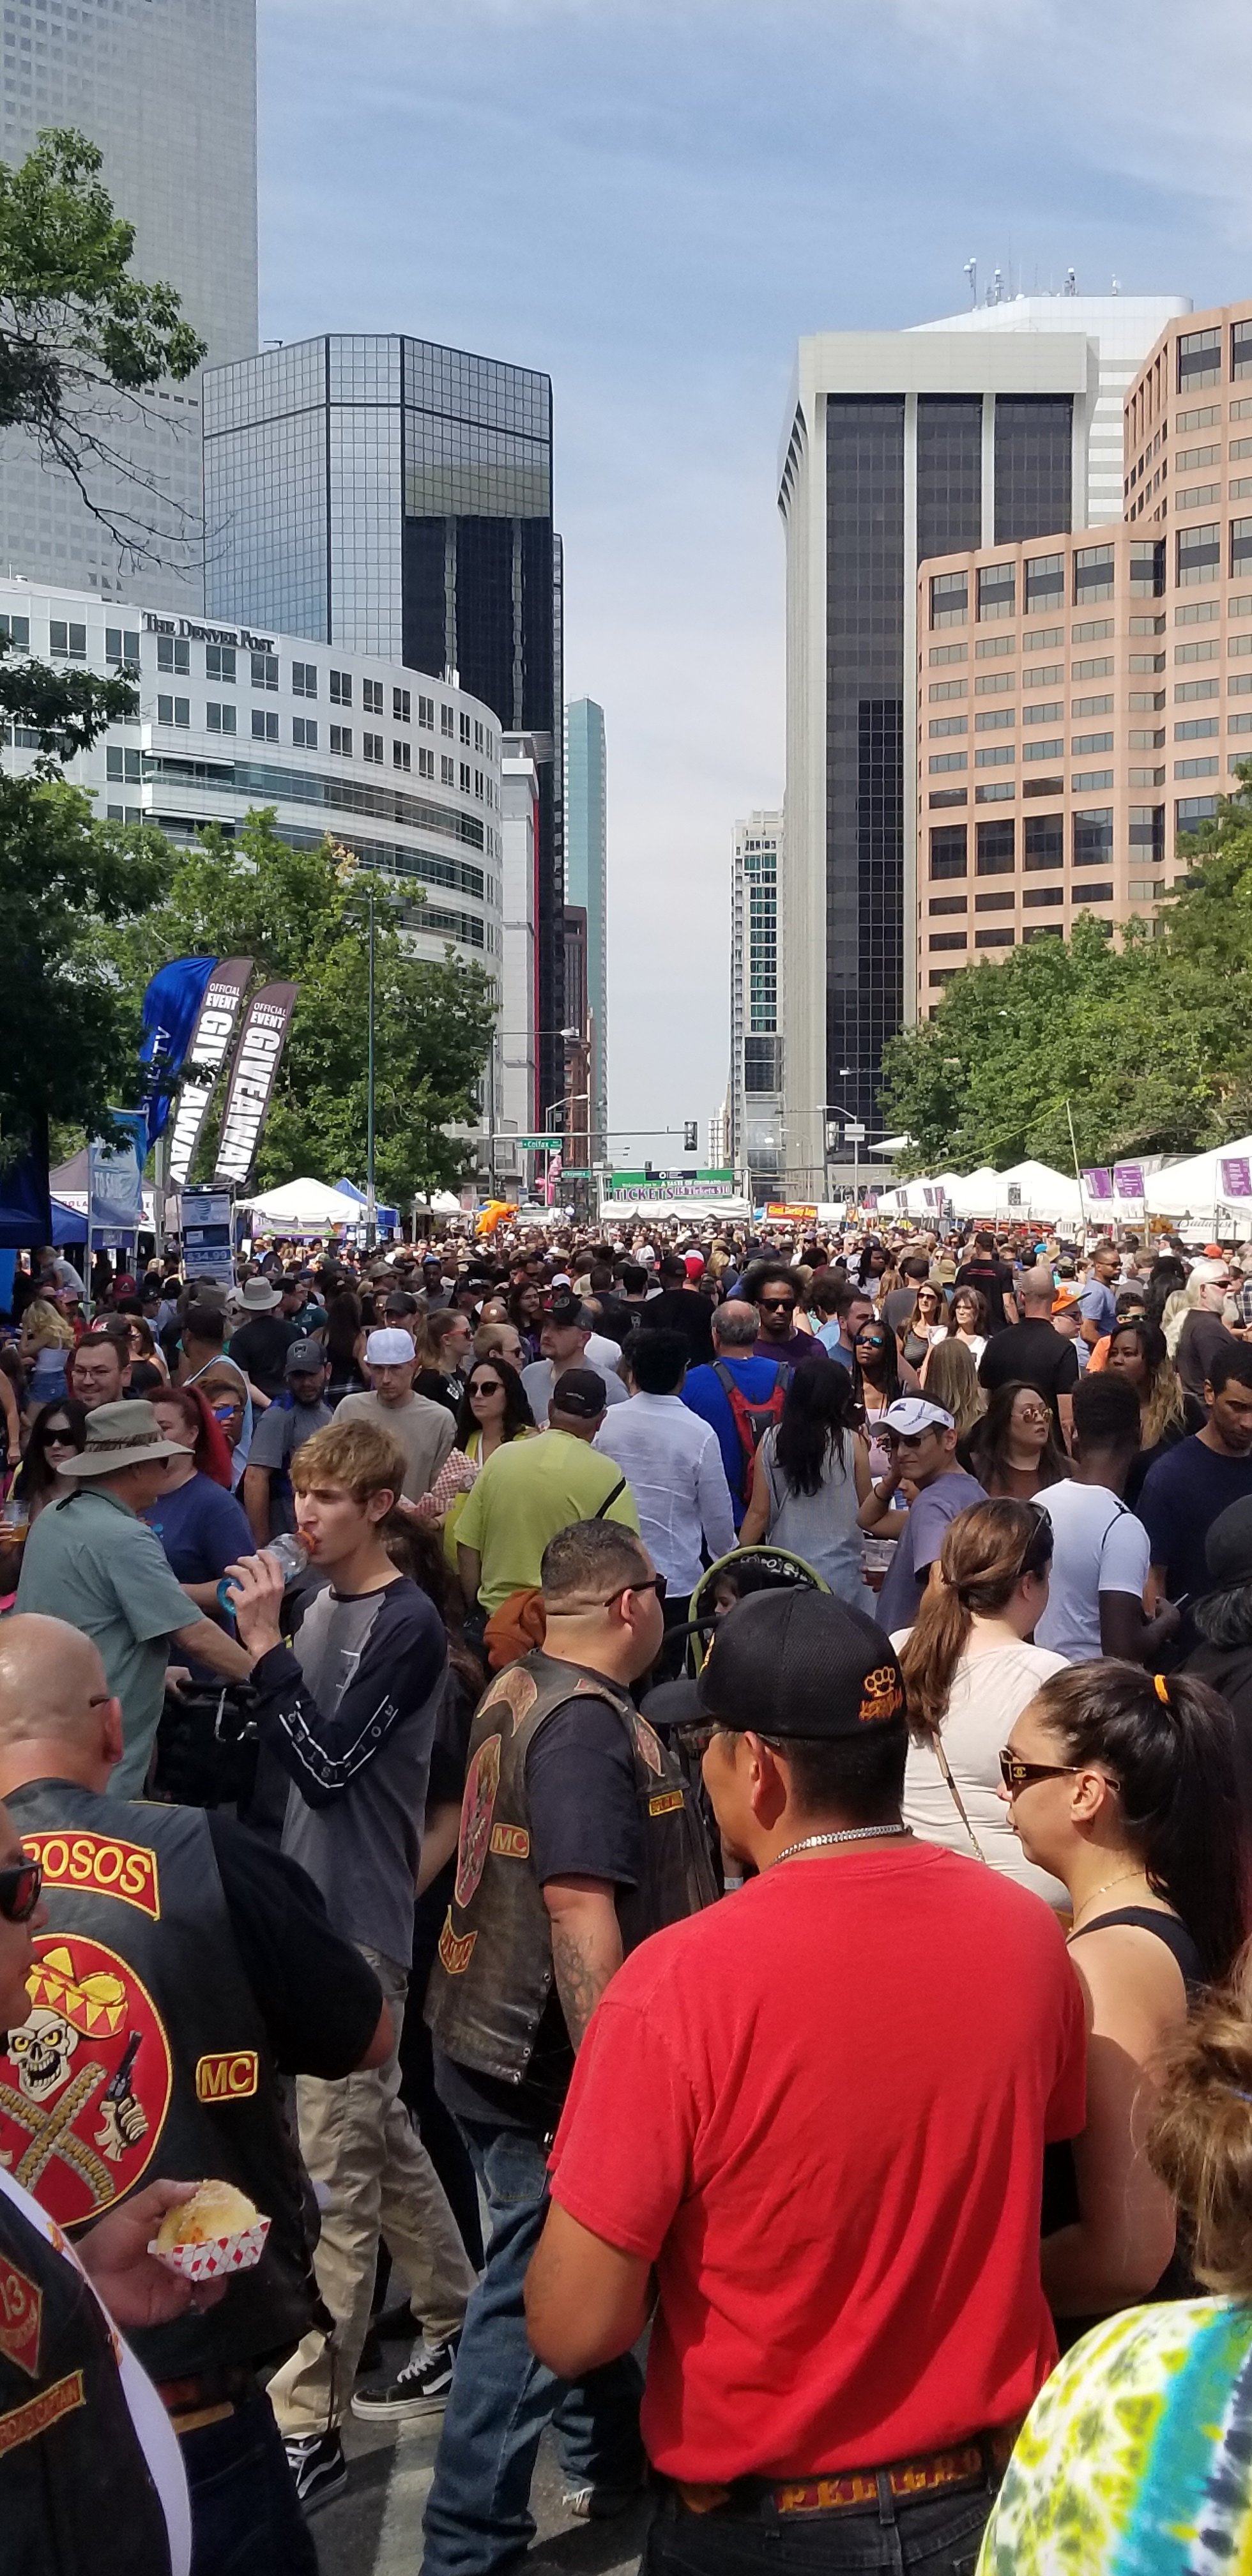 Taste of Colorado 2018 in downtown Denver on Sunday, September 2. Photo by: Matthew McGuire